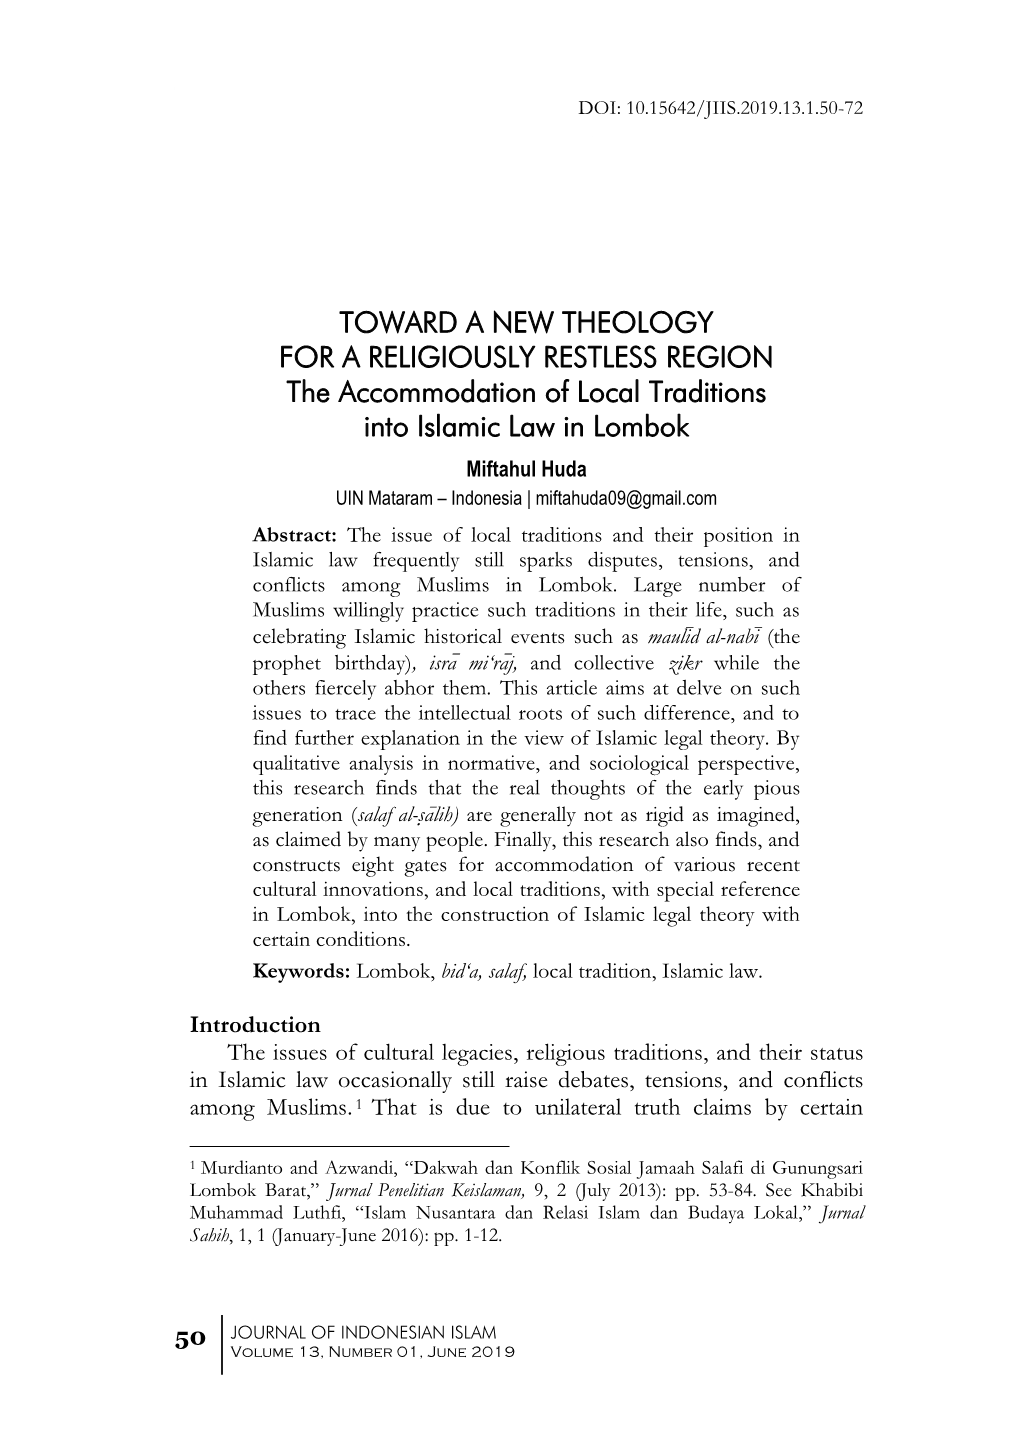 Toward a New Theology for a Religiously Restless